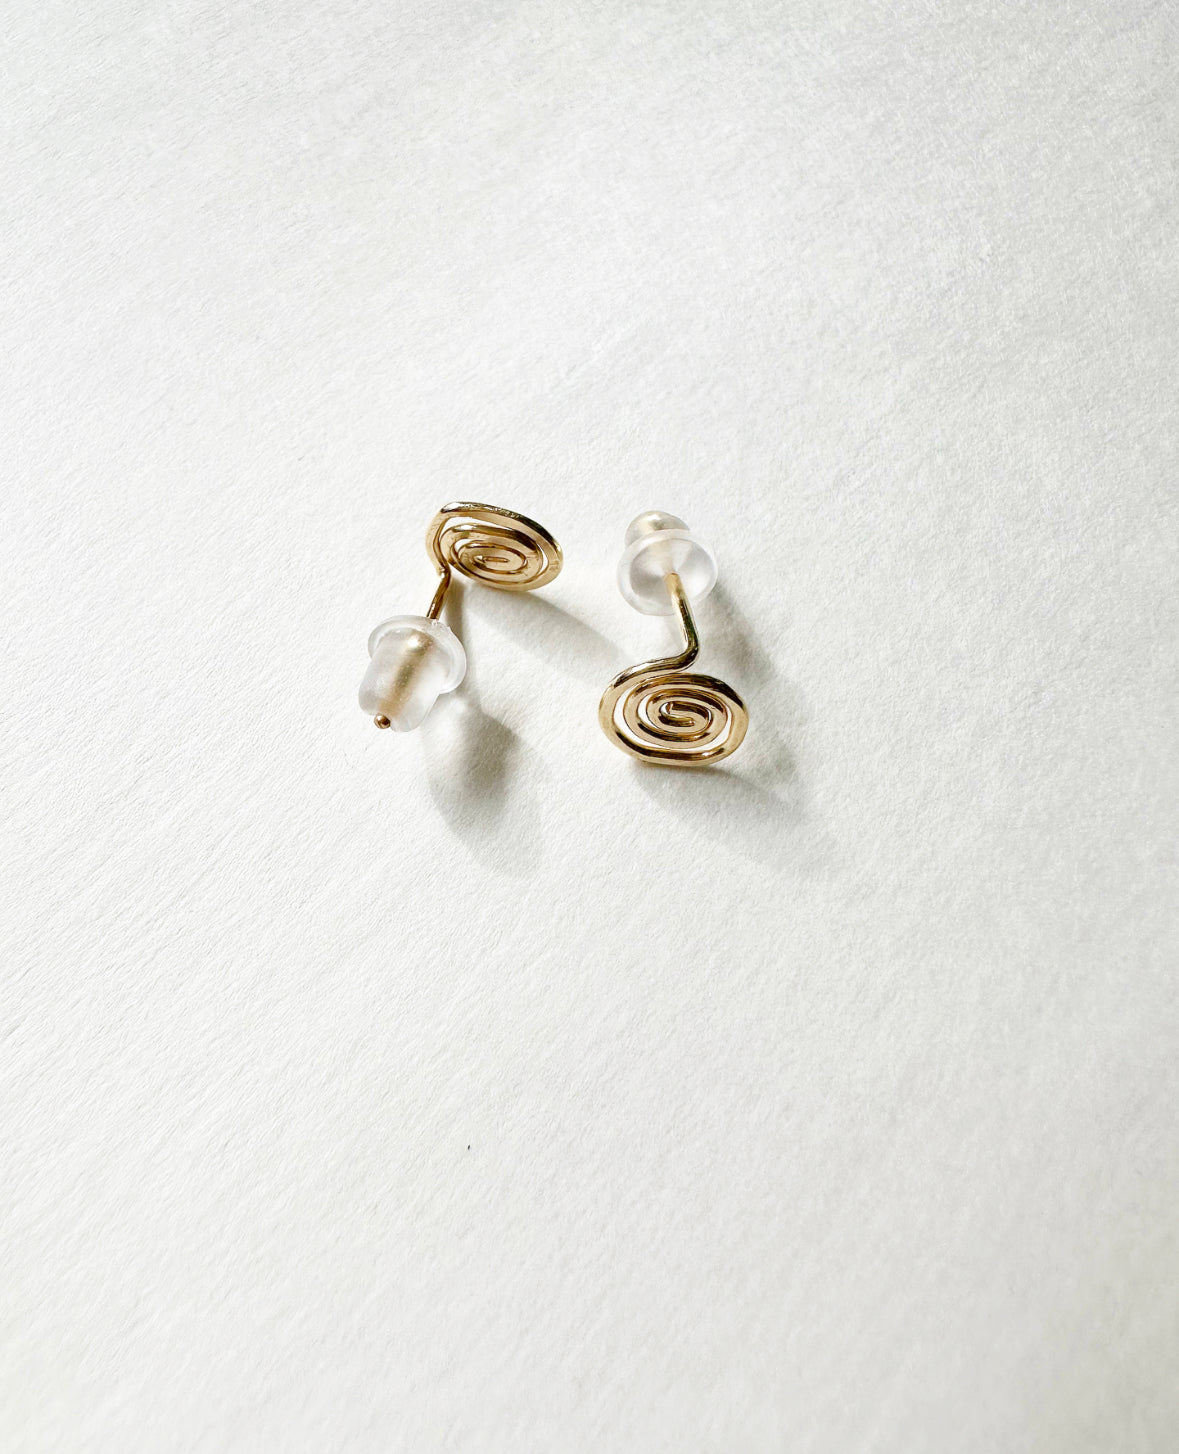 Front and back view of Gold Vortex Studs Earrings with silicone backs.